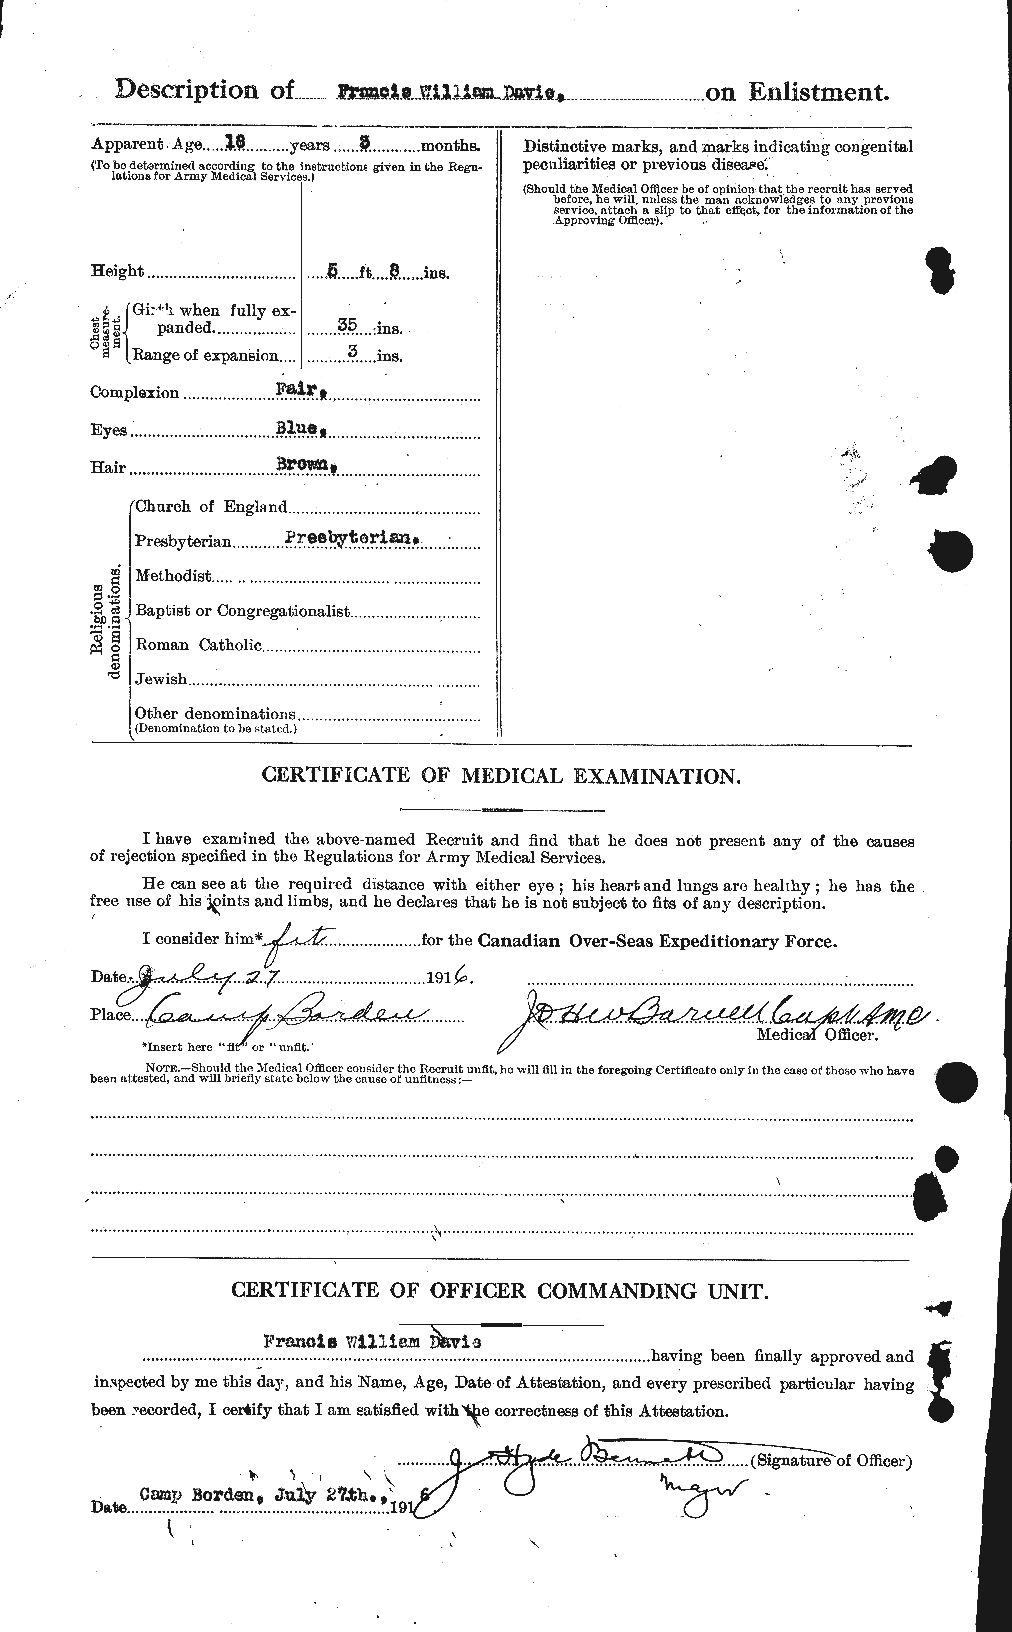 Personnel Records of the First World War - CEF 278821b